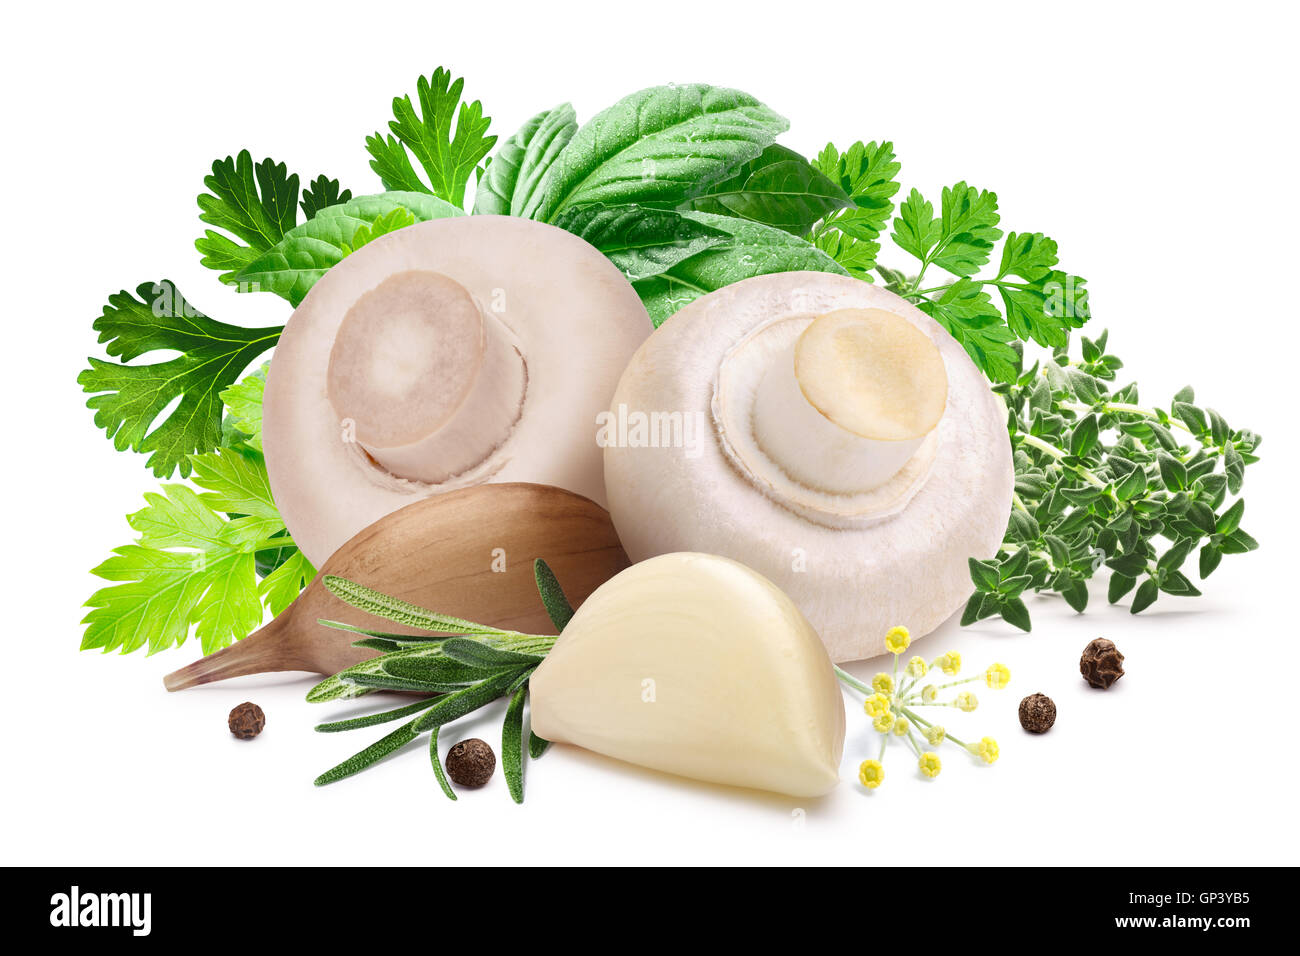 Button mushrooms (Agaricus bisporus) for pickling with herbs and garlic. Clipping path, shadow separated. Design elements Stock Photo